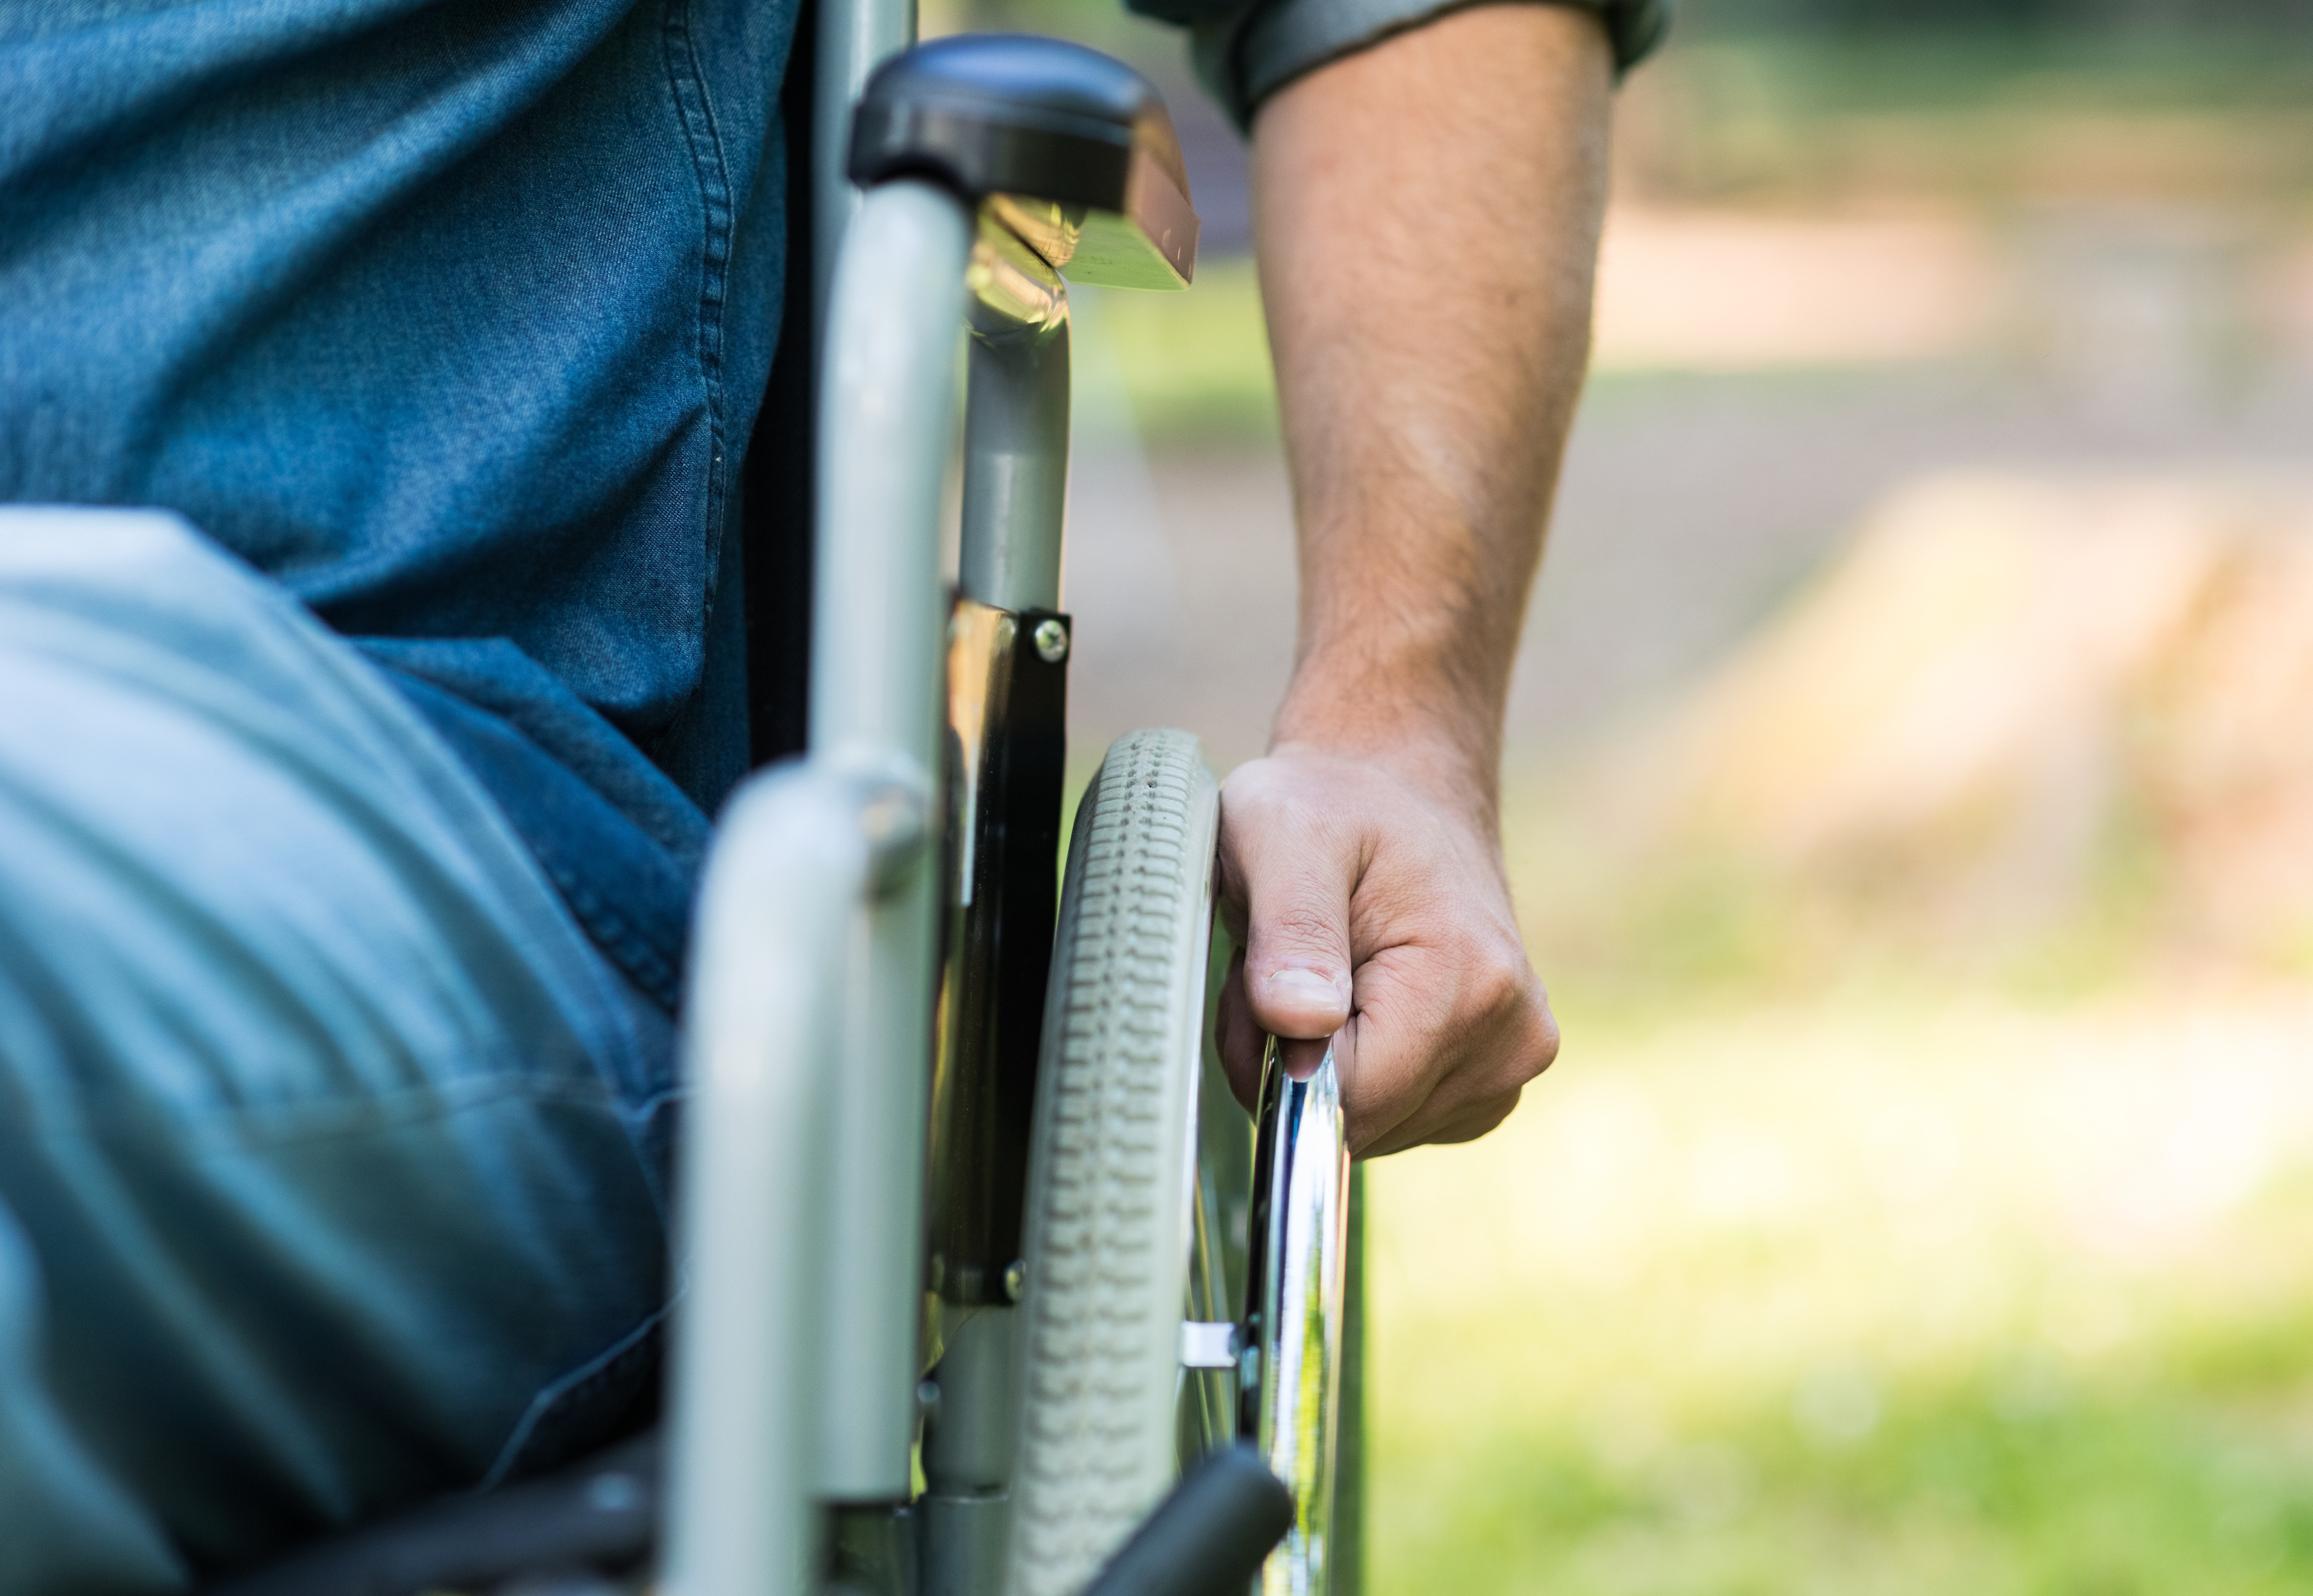 Detail of a man using a wheelchair in a park. Copy-space on the right side